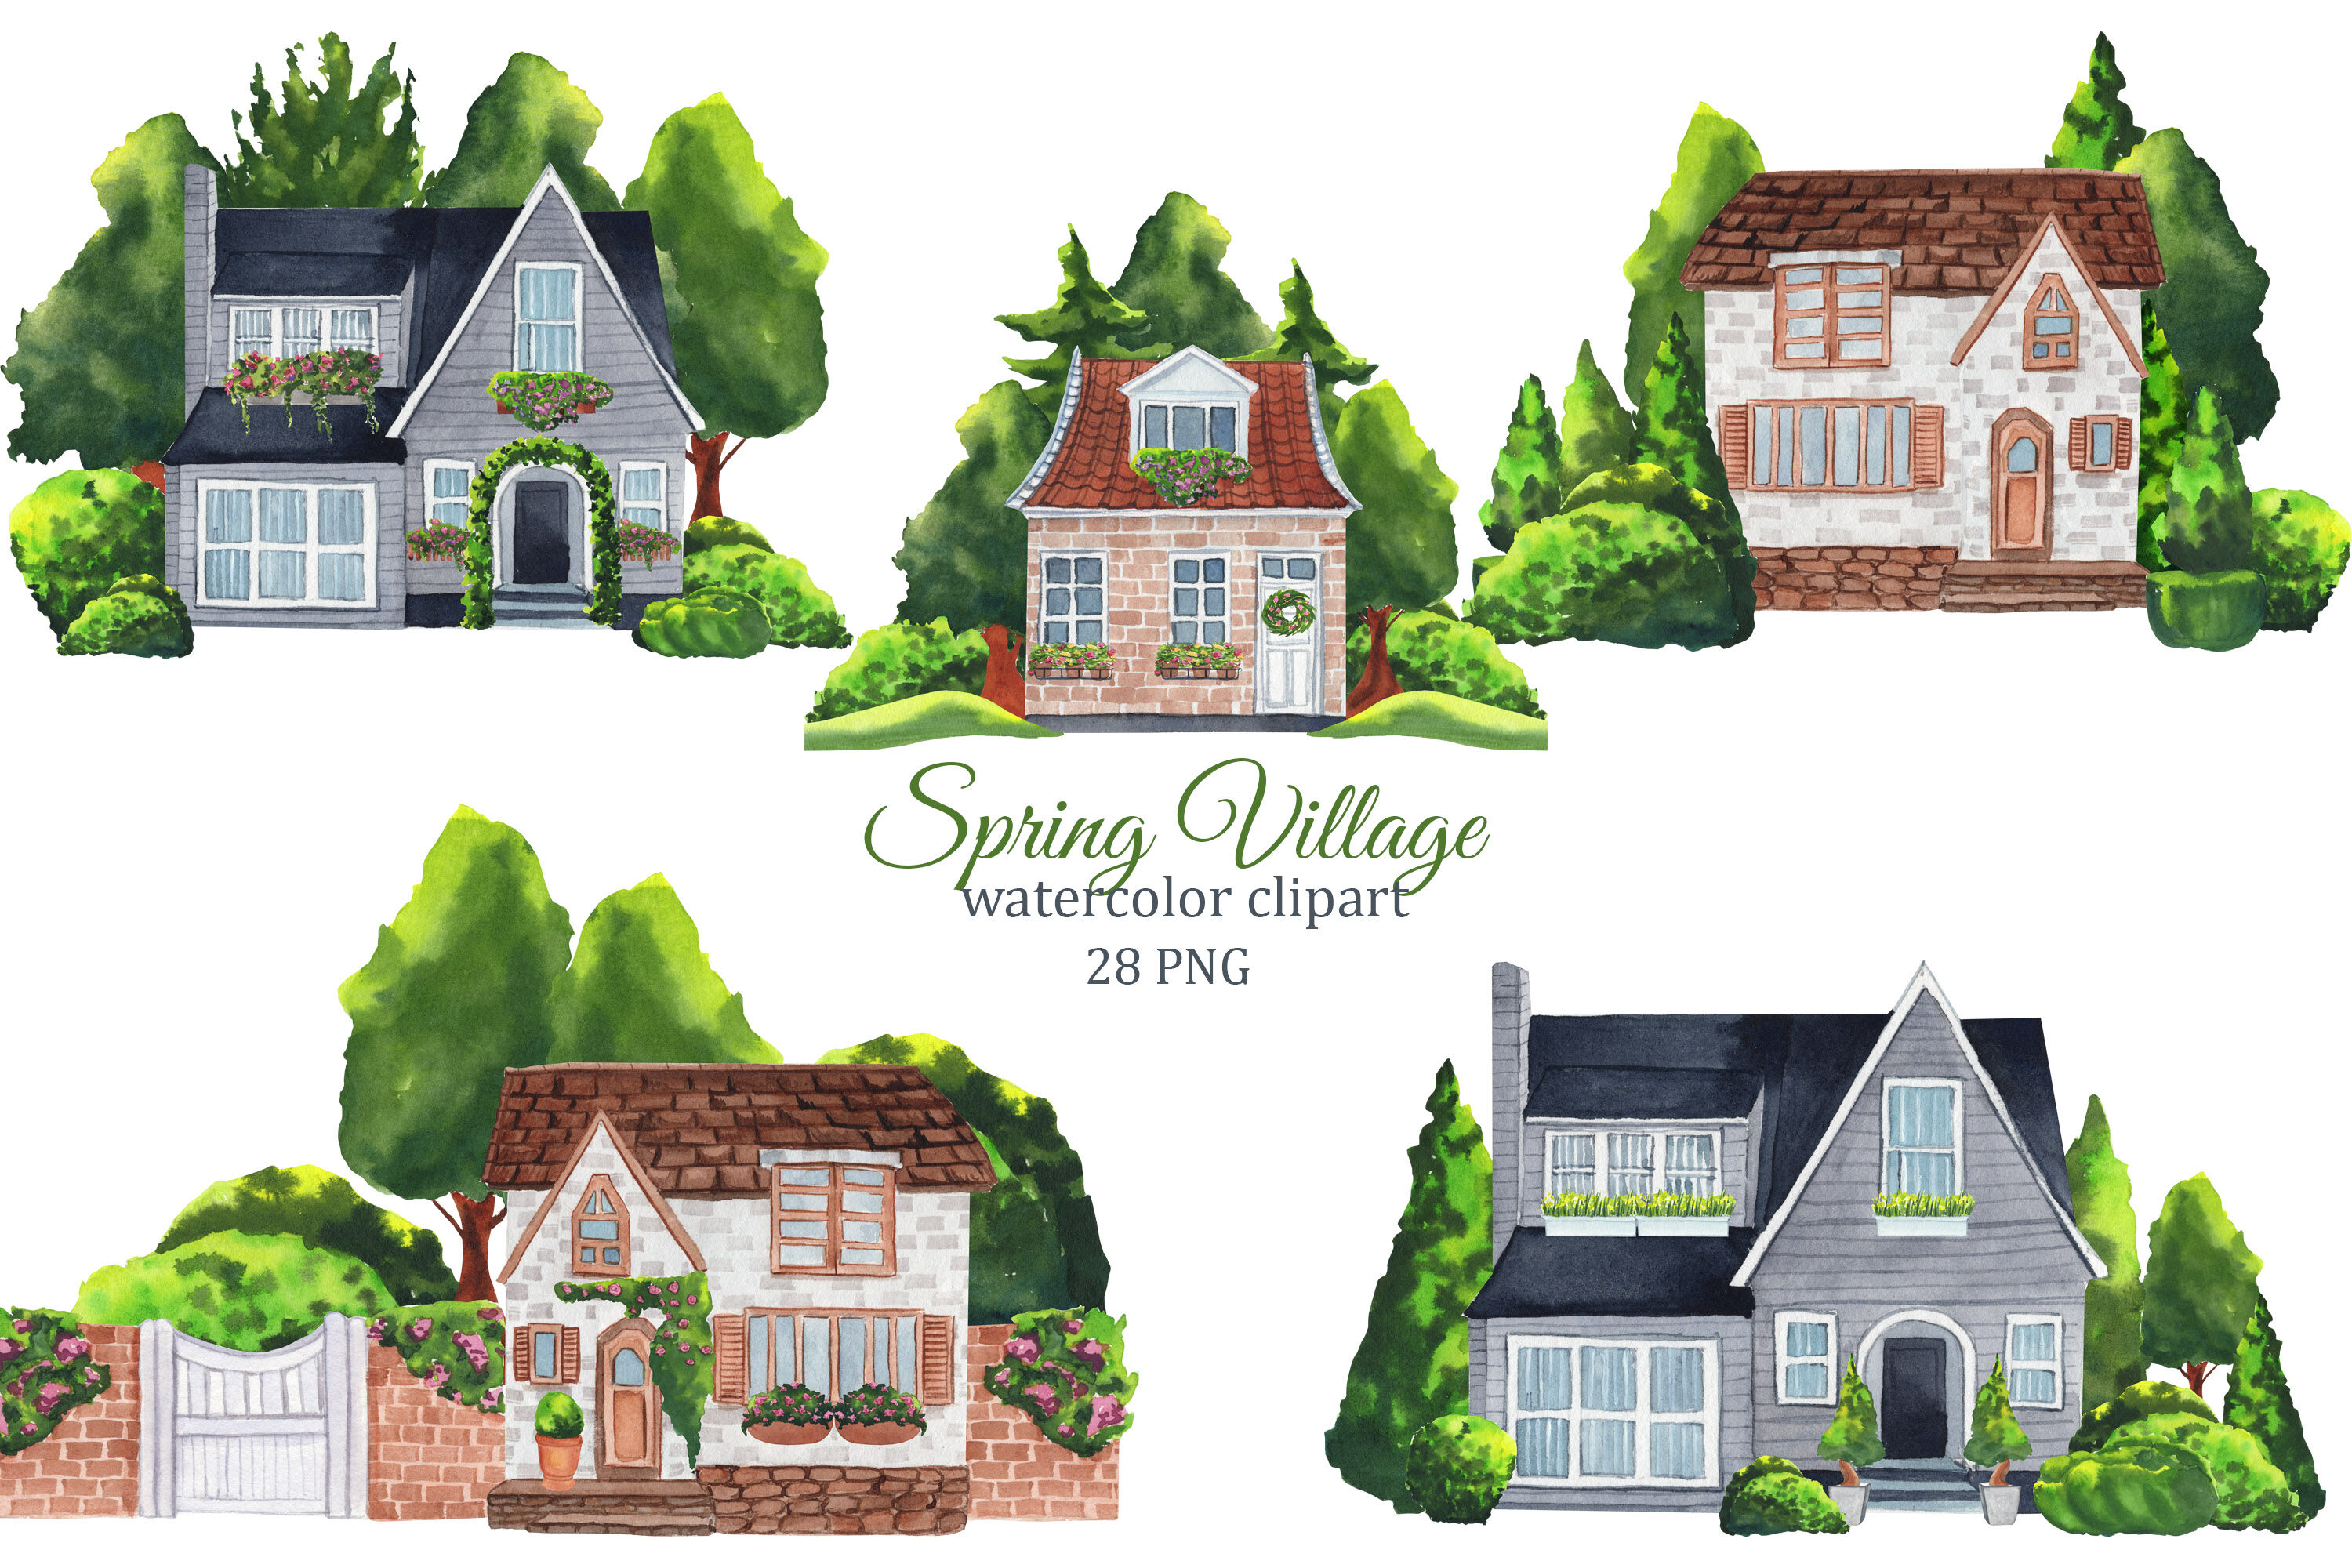 house sweet home clipart